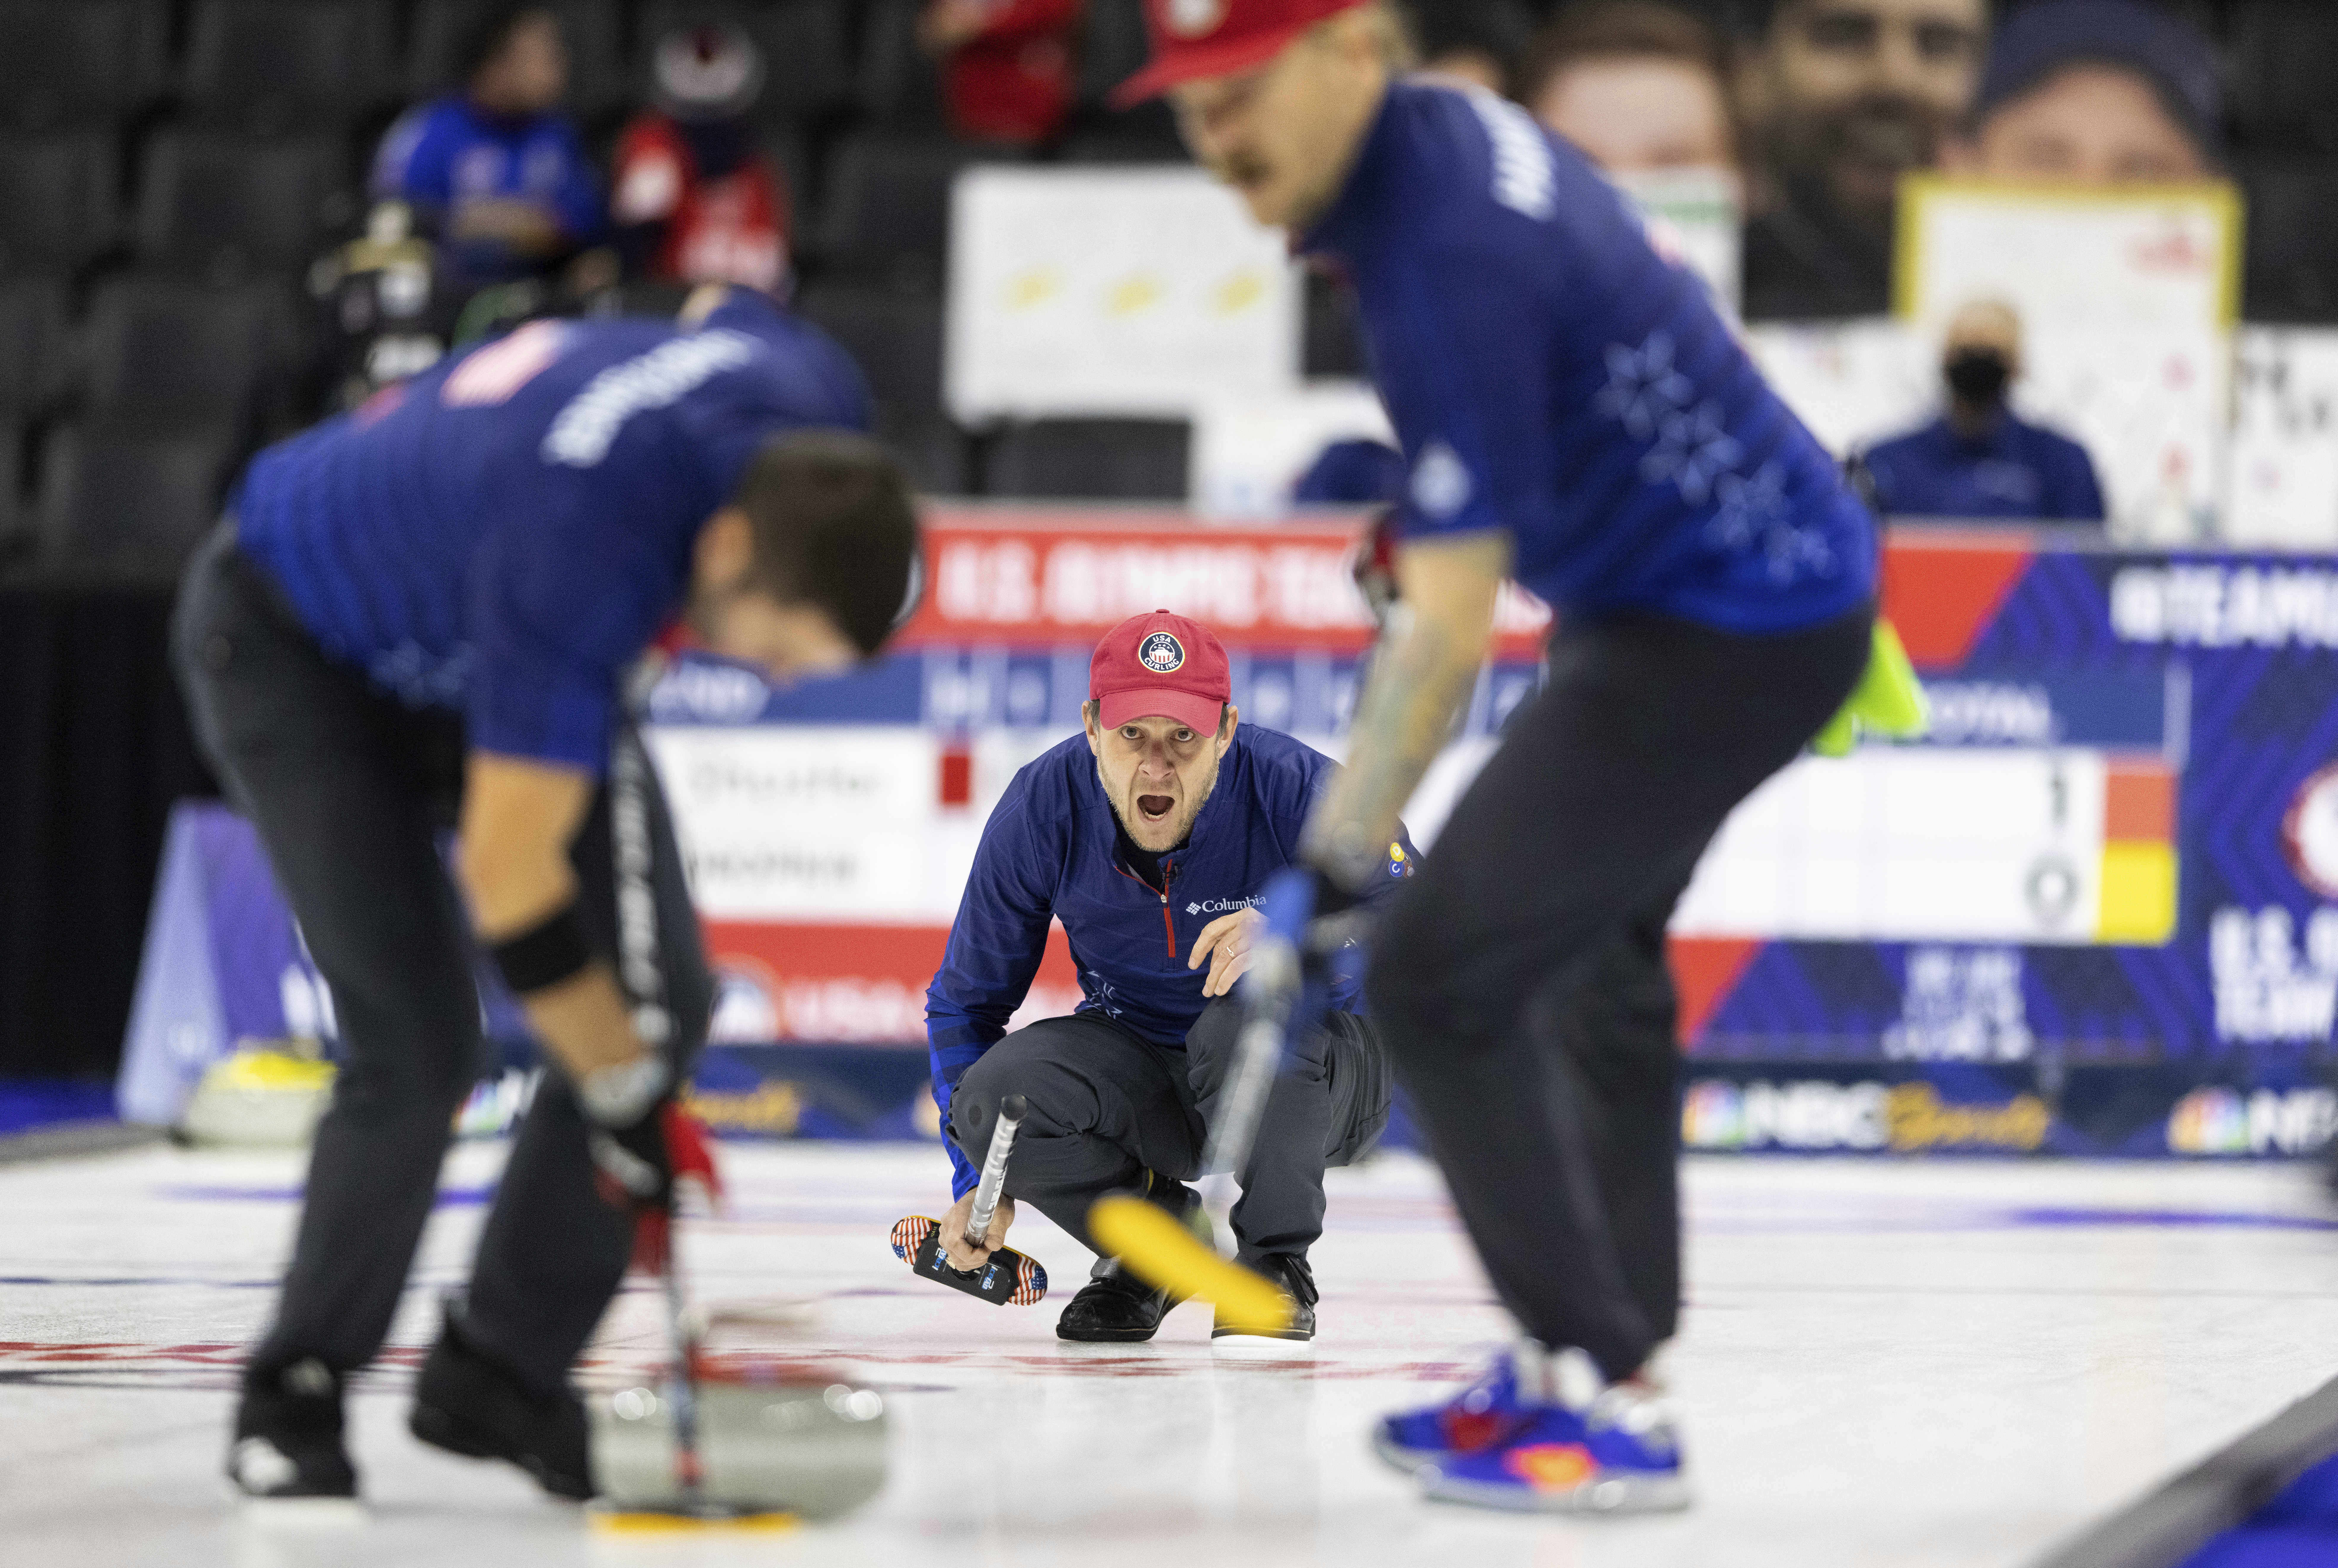 Reigning Olympic curling champs begin 2022 campaign with close win over Russia